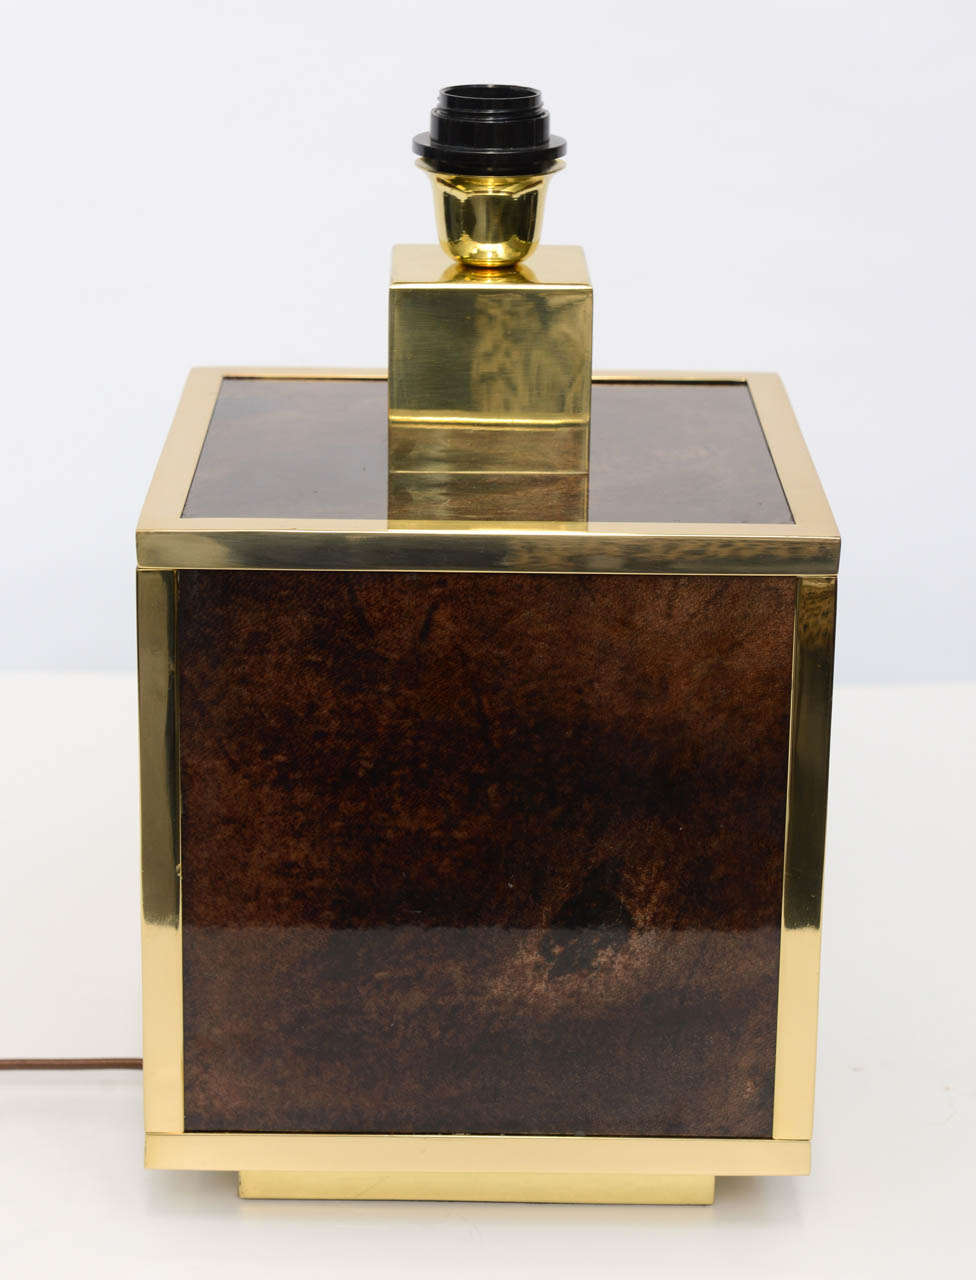 Perfectly restored, this goatskin clad cubed lamp is ready to go!